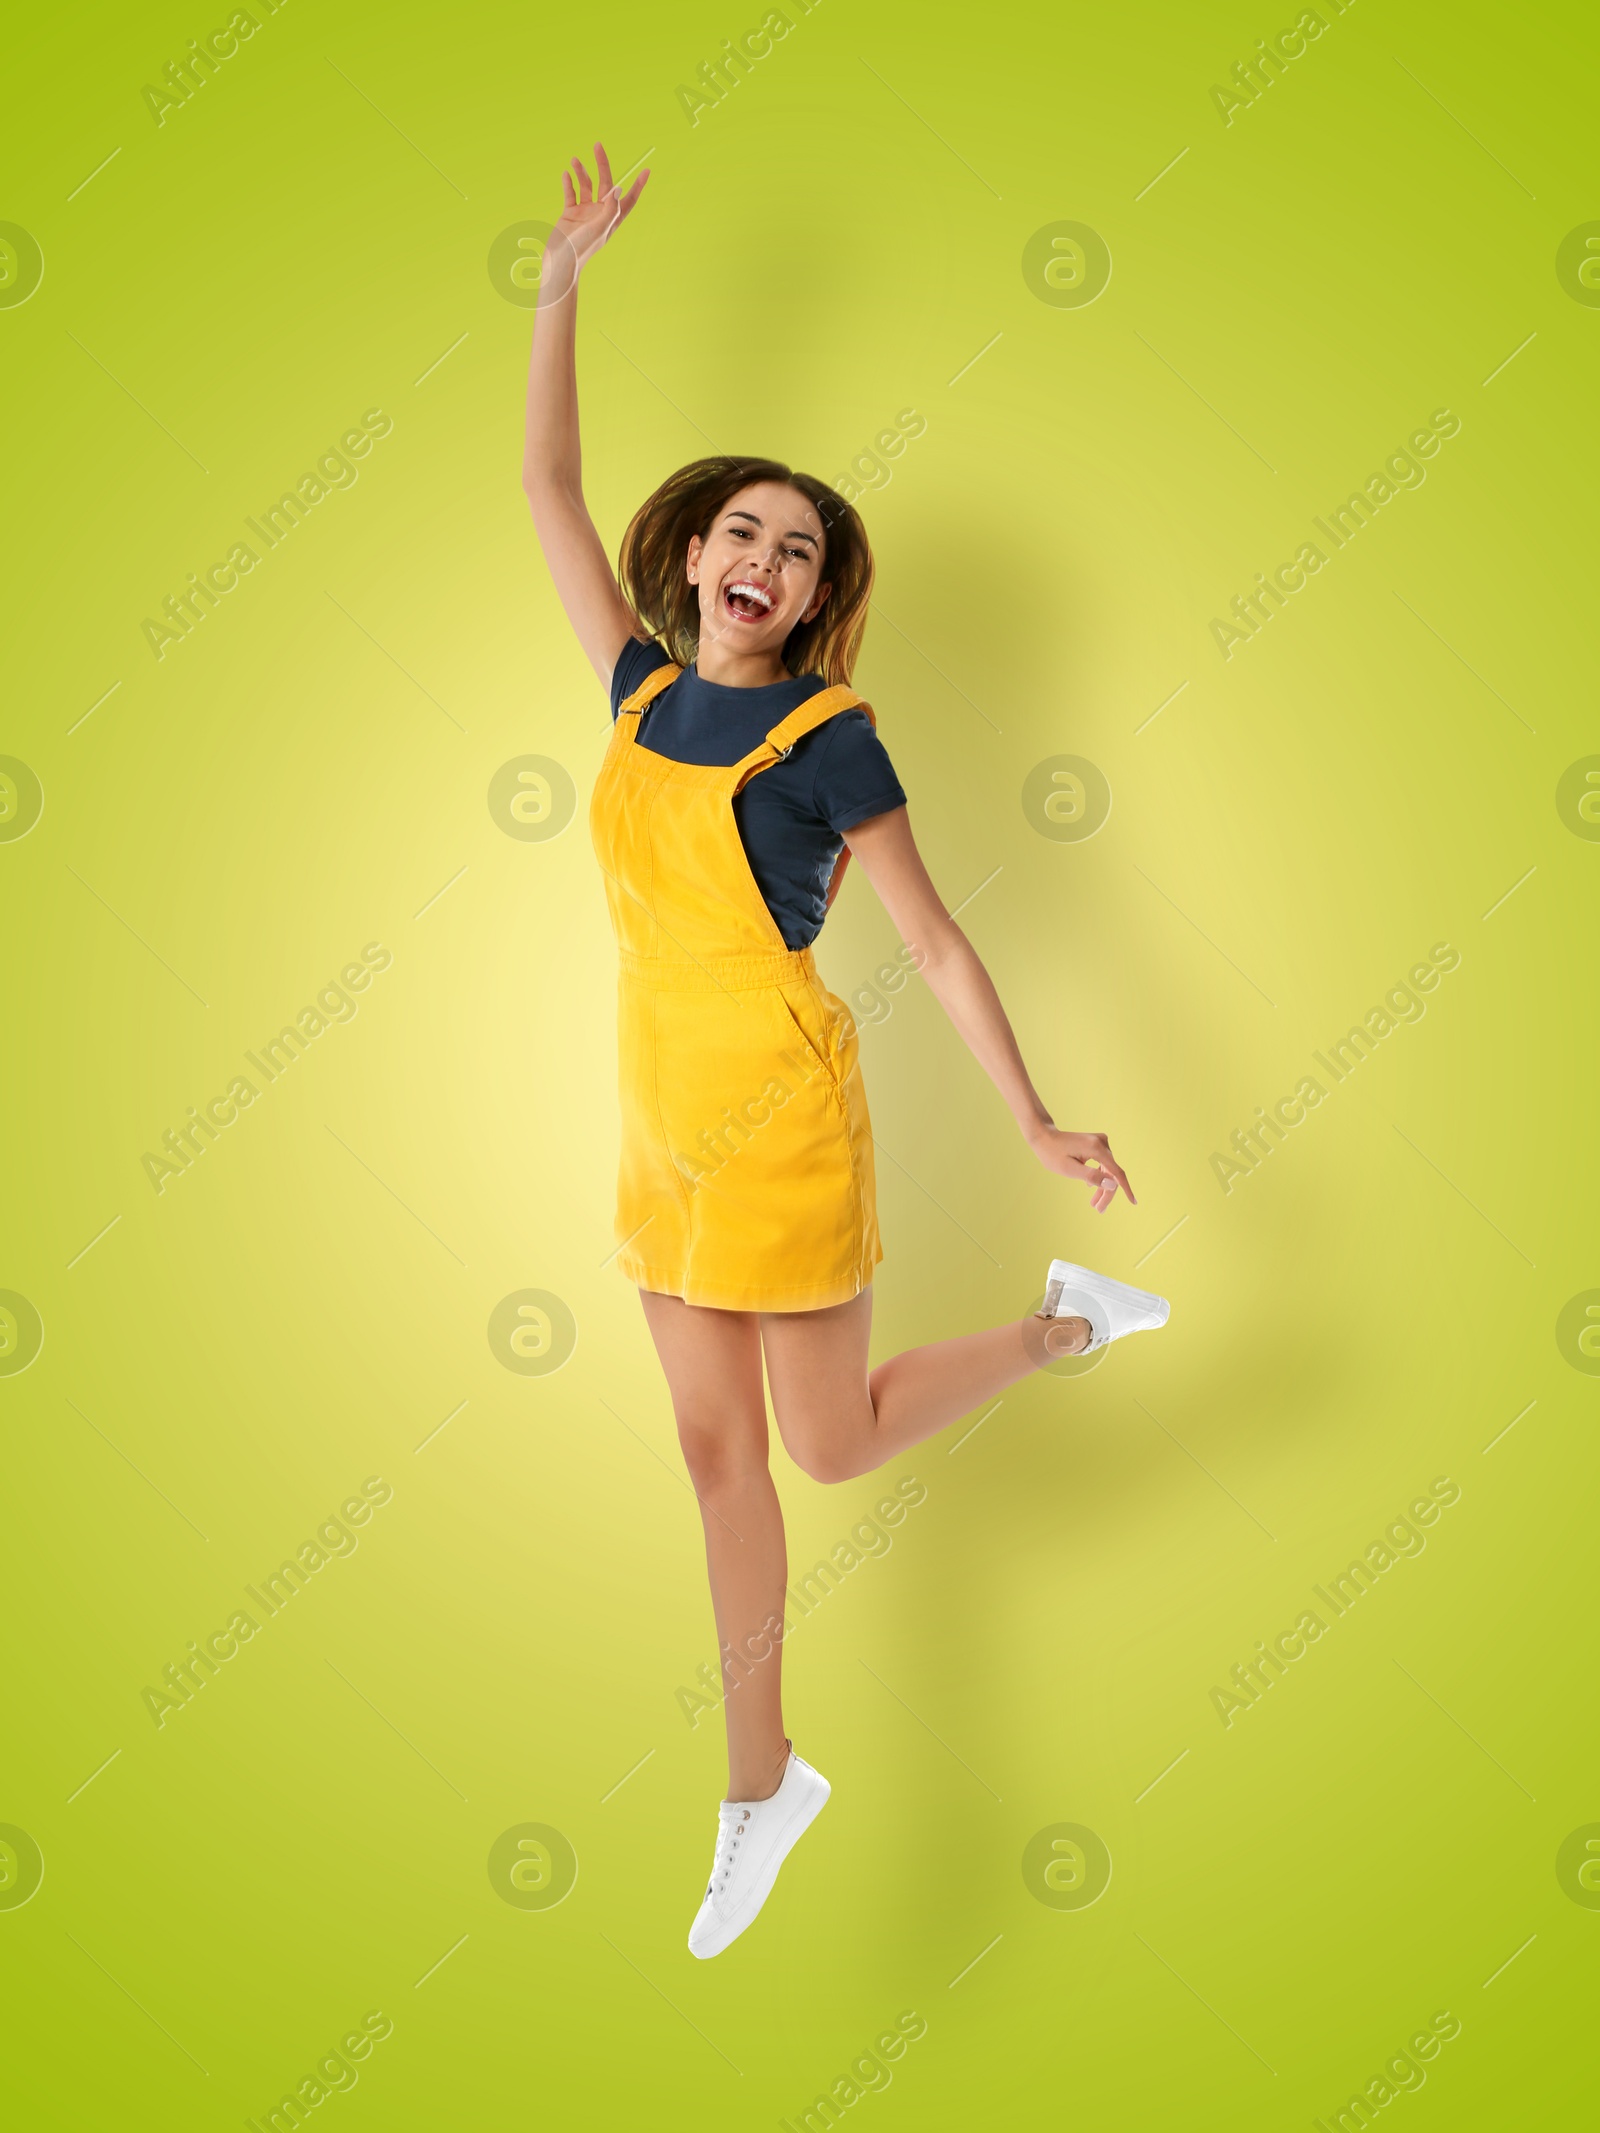 Image of Positive young woman jumping on light green gradient background